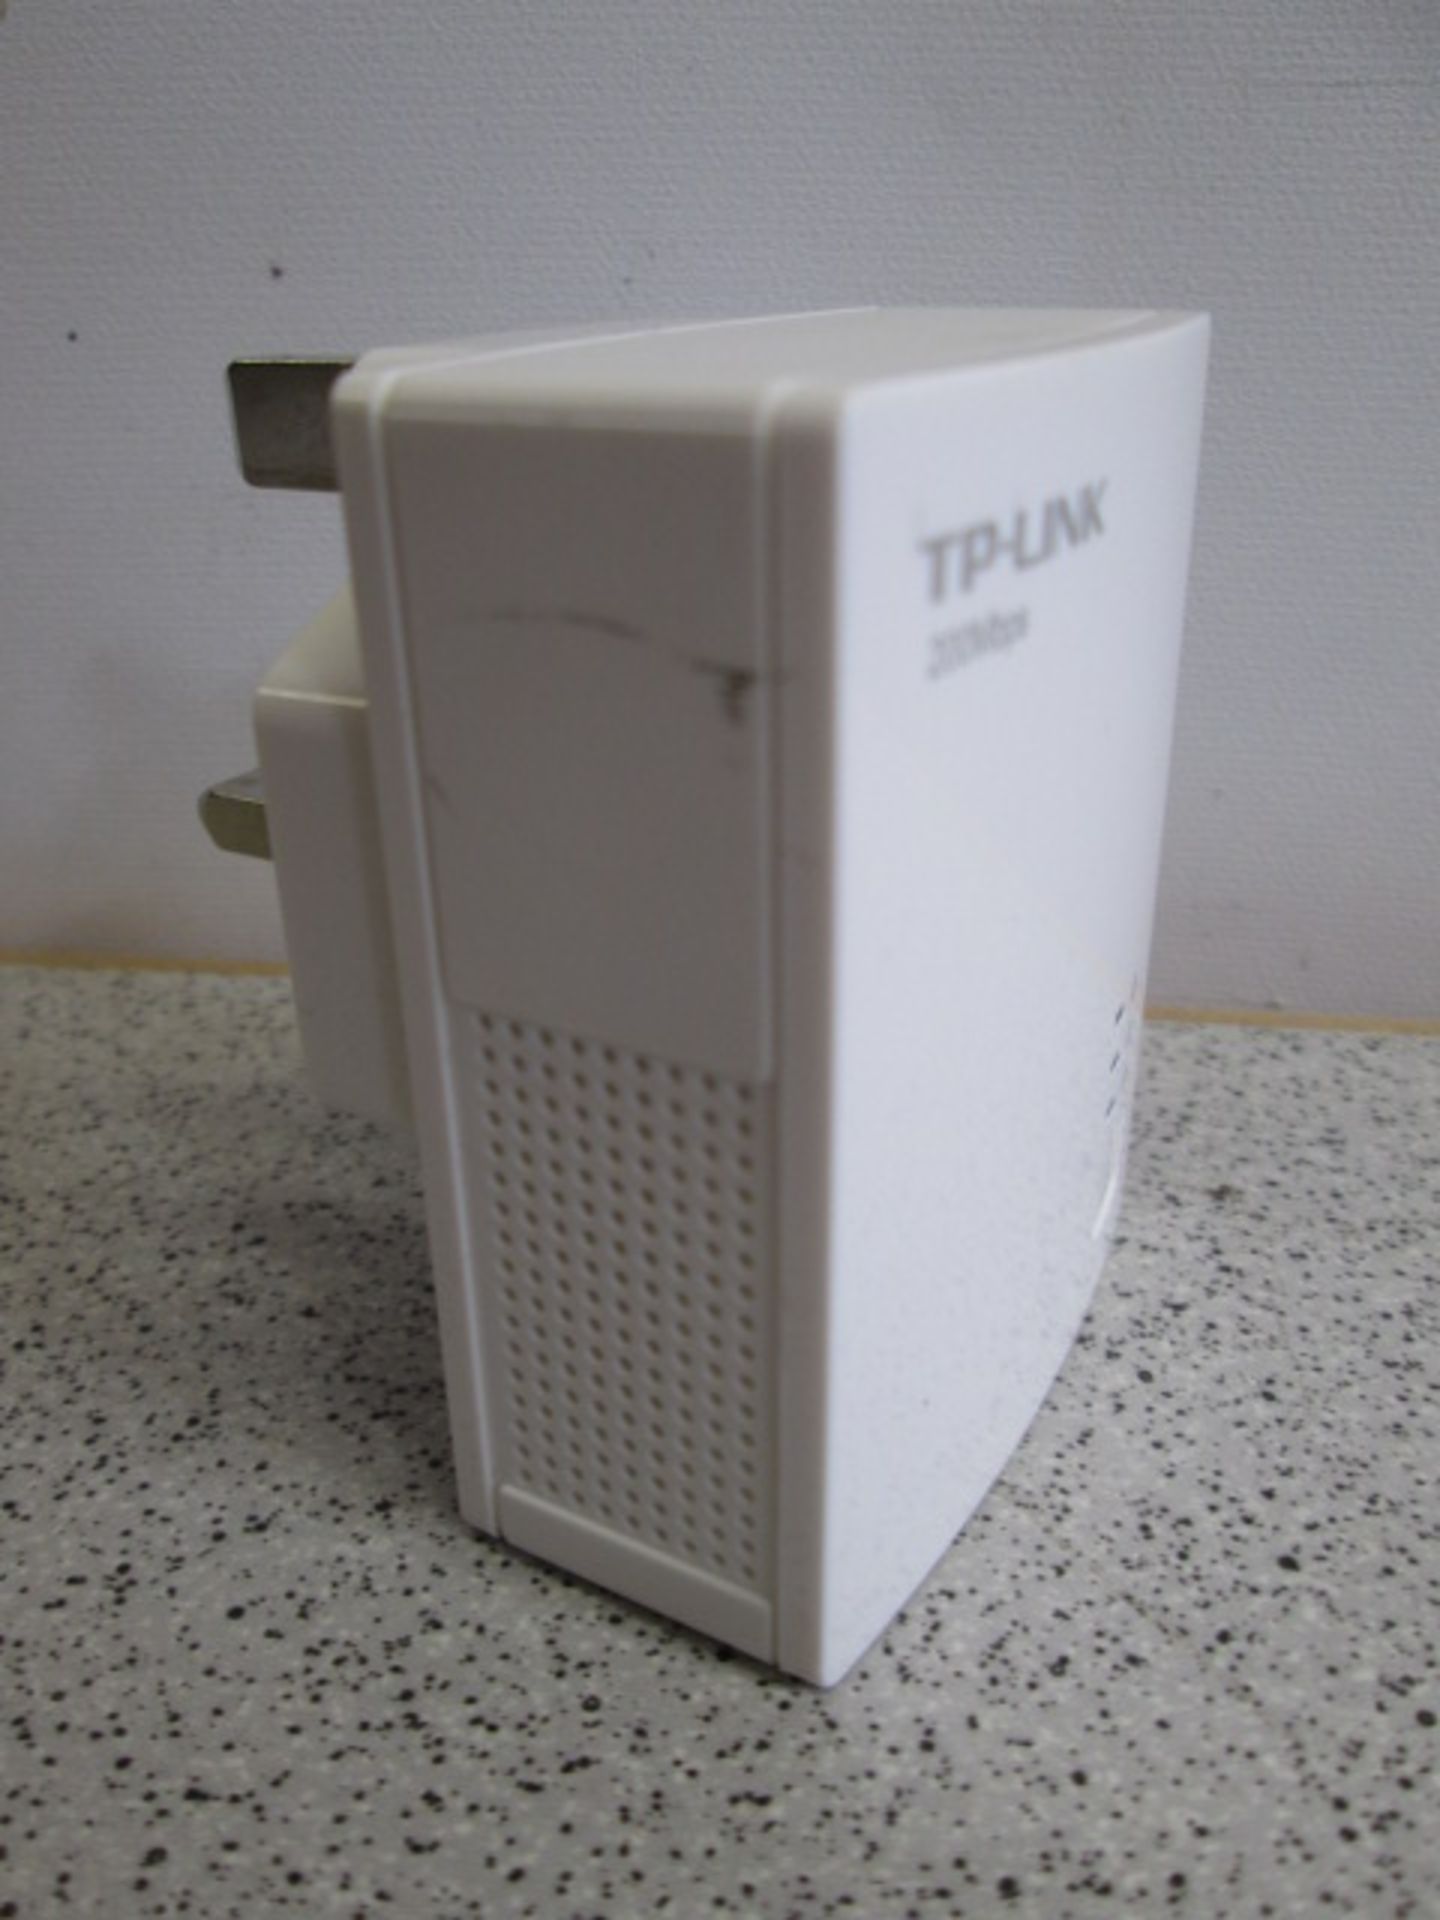 Apply TV Model A1469 with Power Lead, HDMI Cable, TP-Link Model TL-PA211 & Data Cable - Image 5 of 6